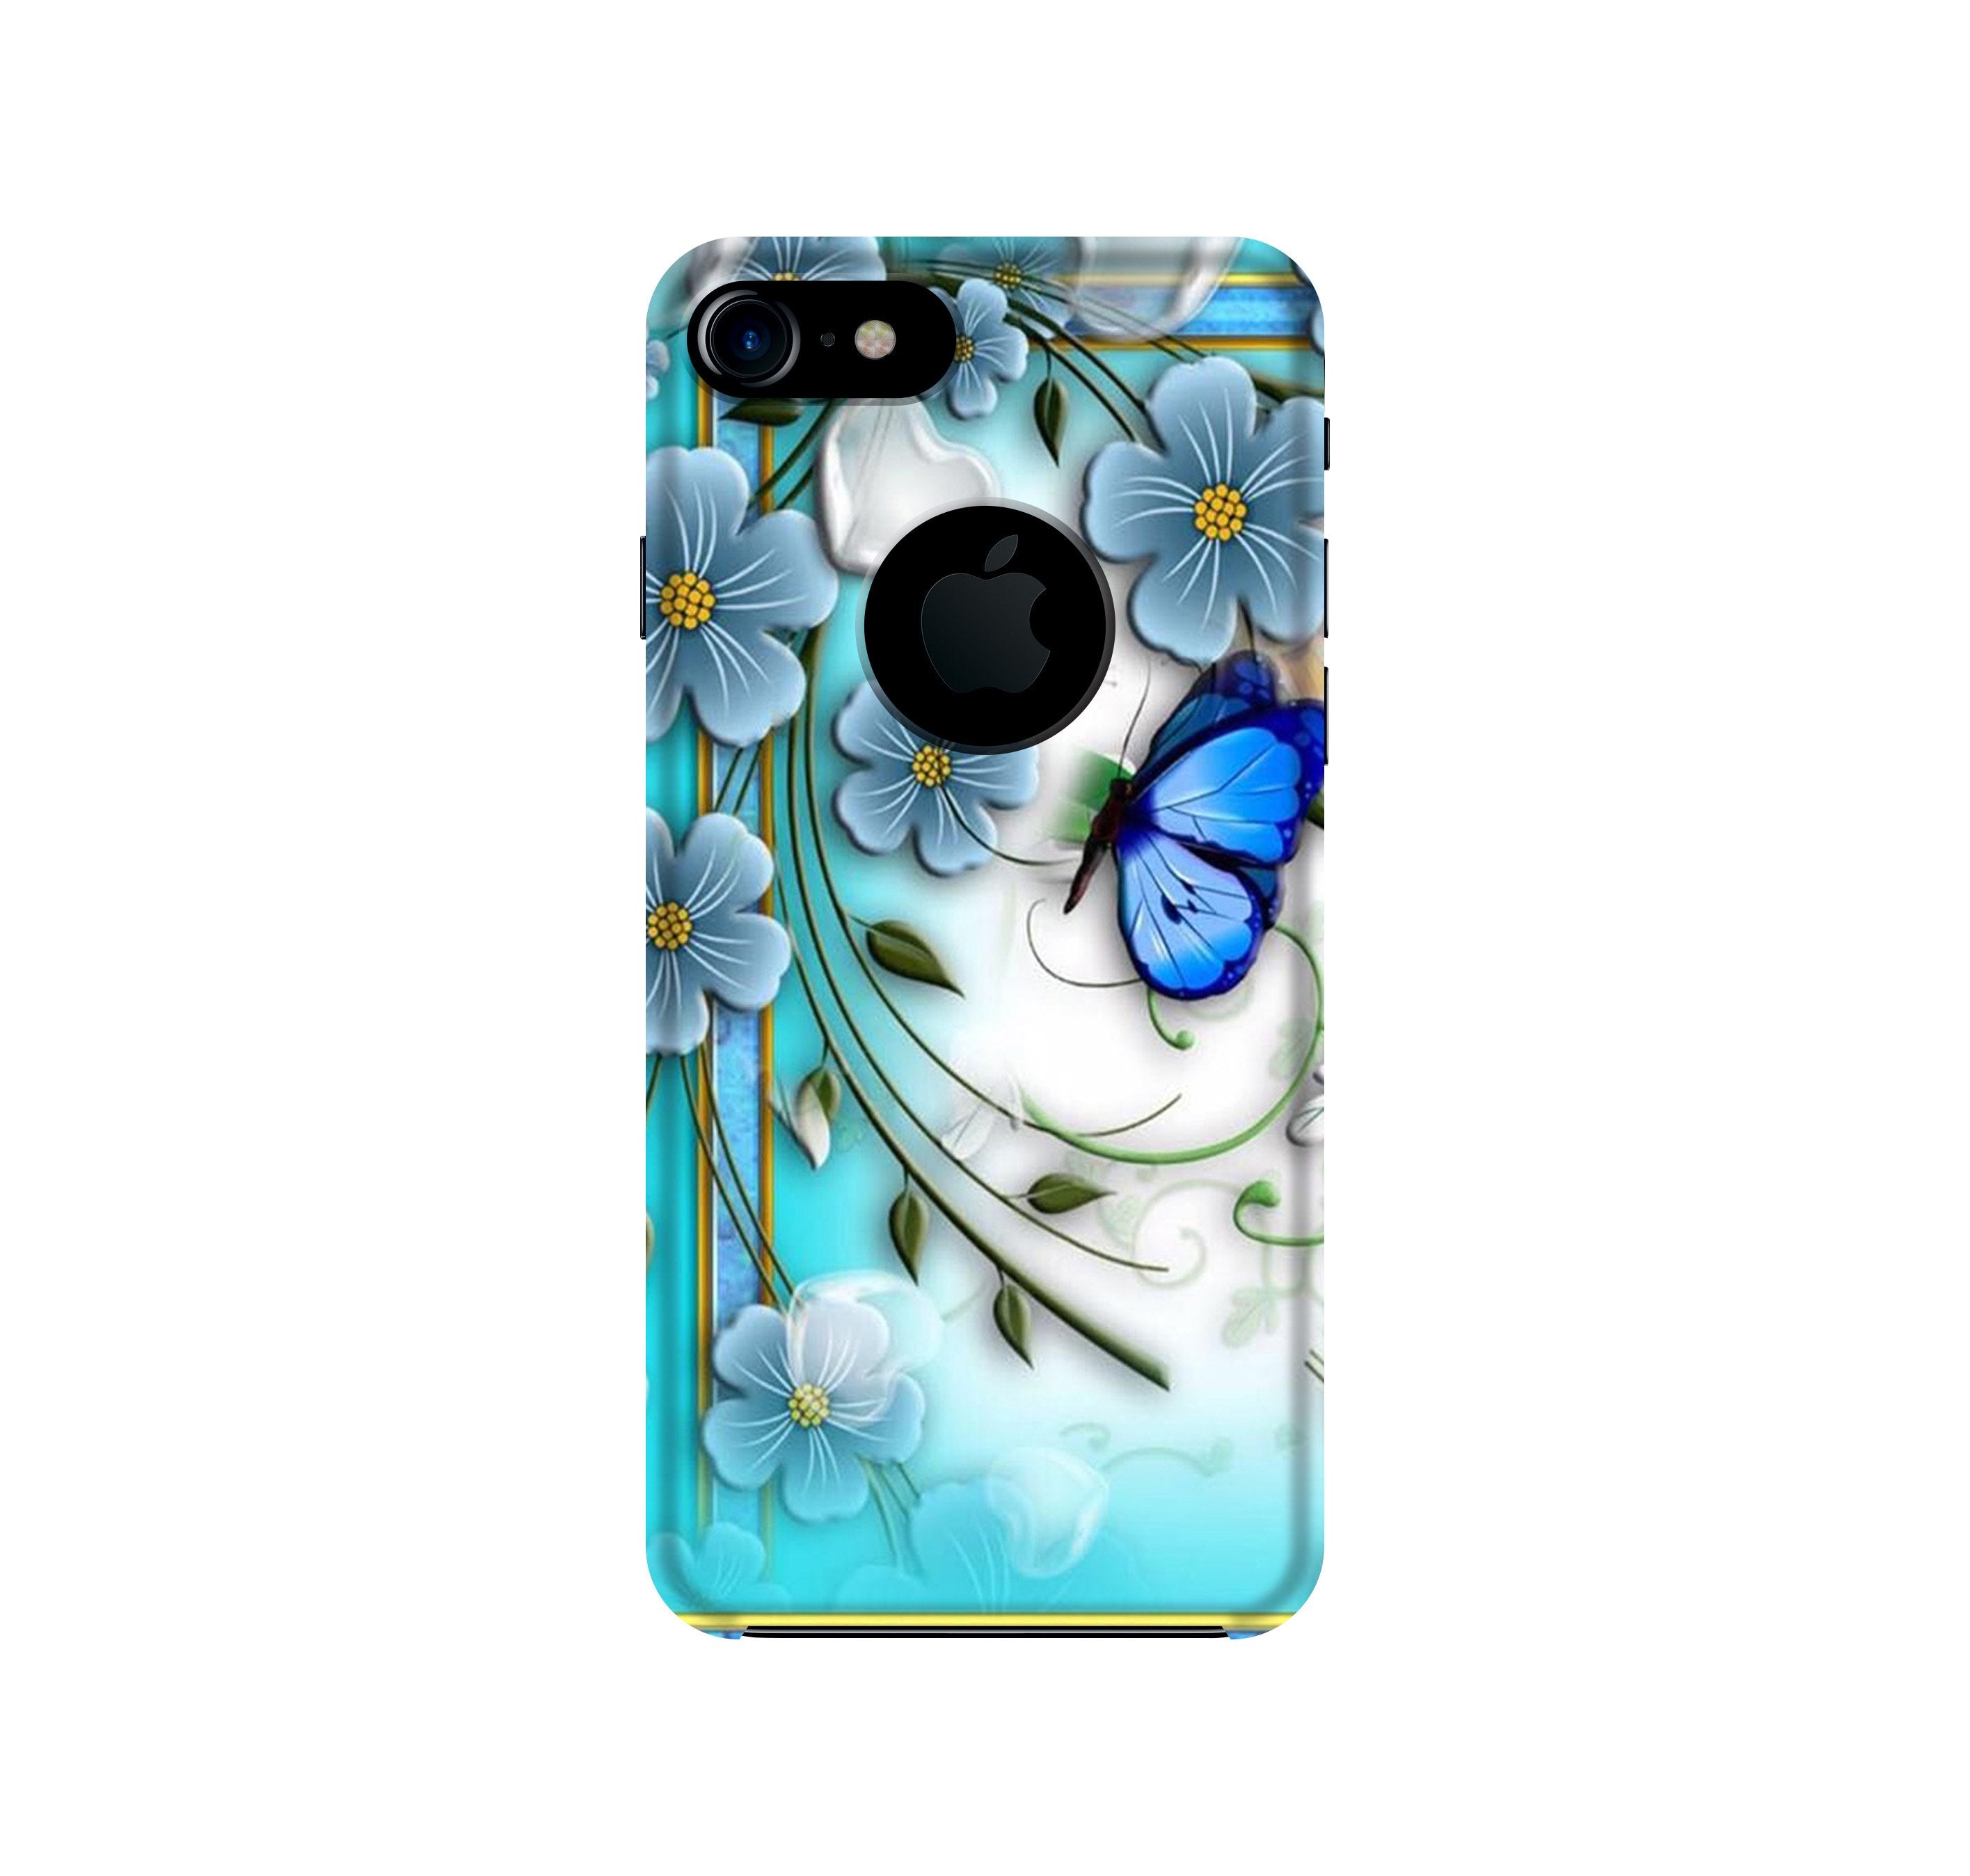 Blue Butterfly Case for iPhone 7 logo cut